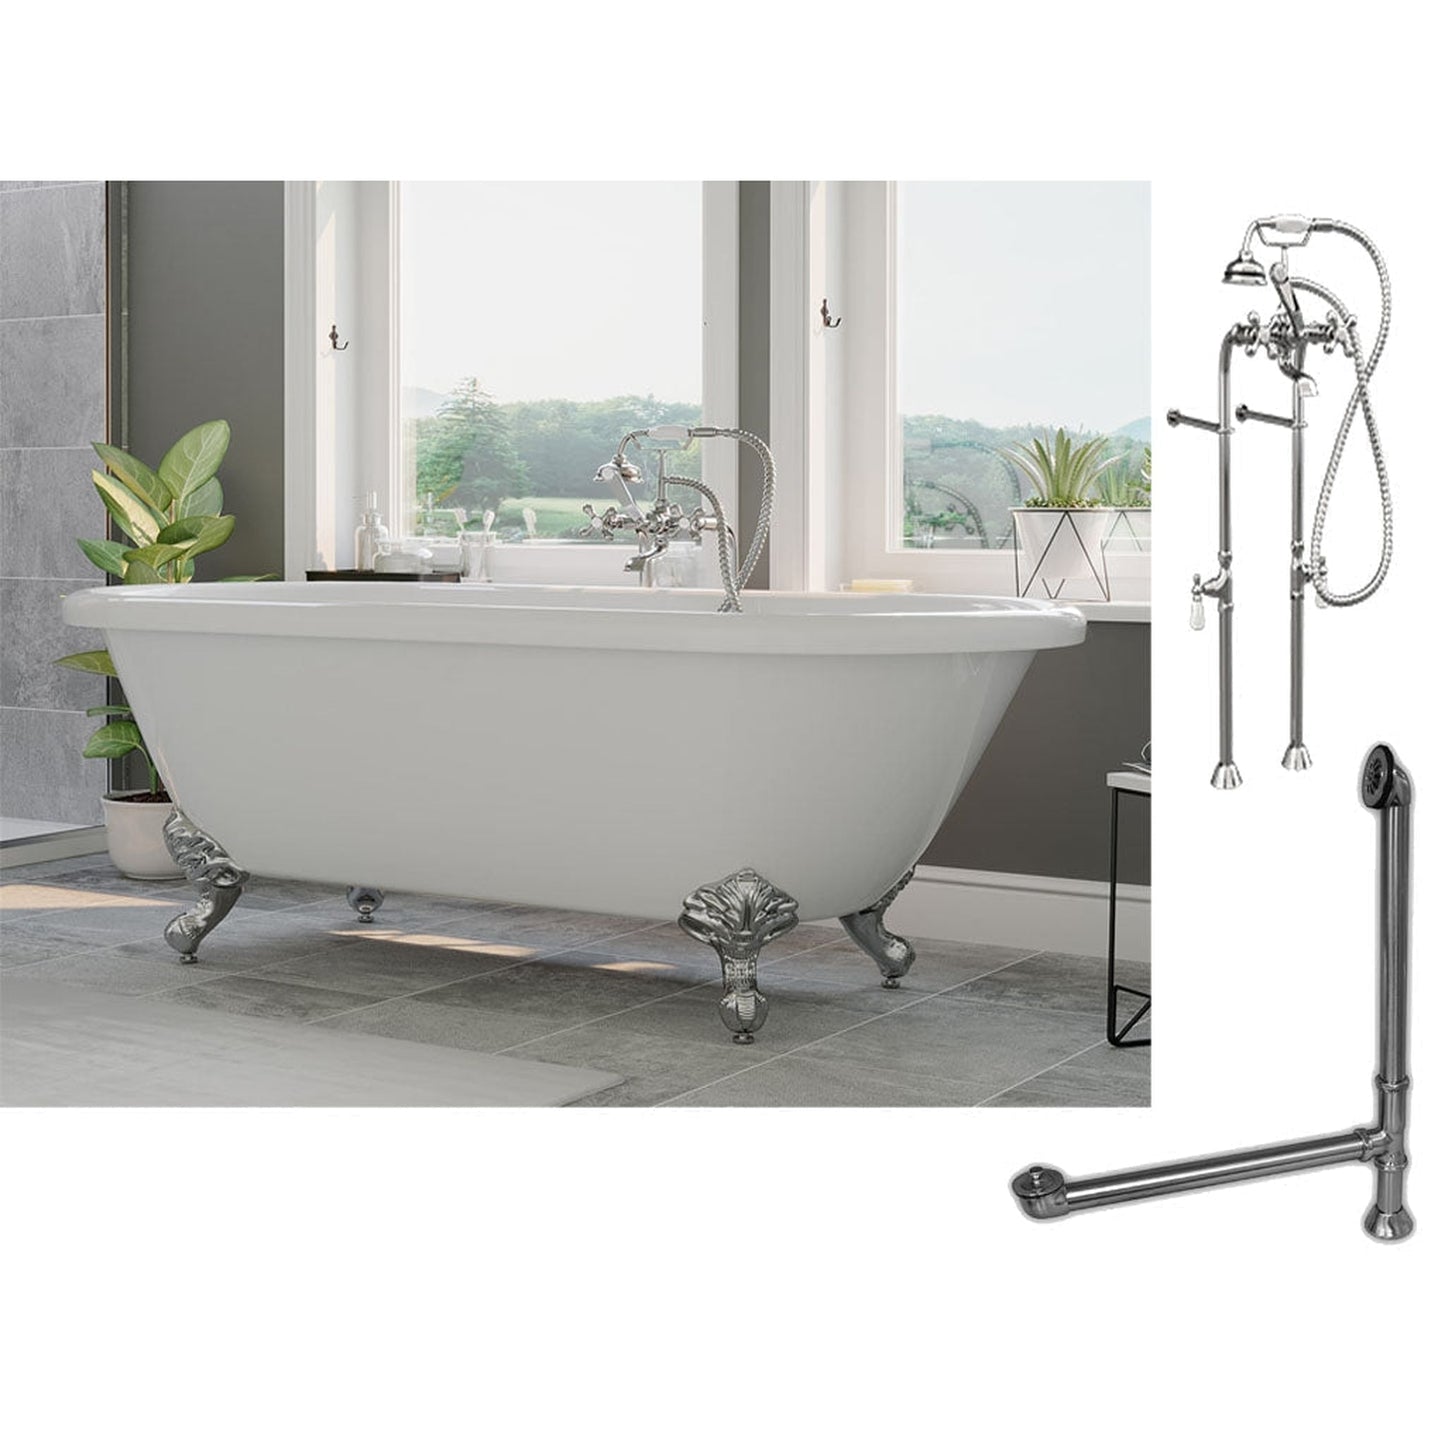 Cambridge Plumbing 70" White Acrylic Double Ended Clawfoot Bathtub With No Deck Holes And Complete Plumbing Package Including Floor Mounted British Telephone Faucet, Drain And Overflow Assembly In Polished Chrome